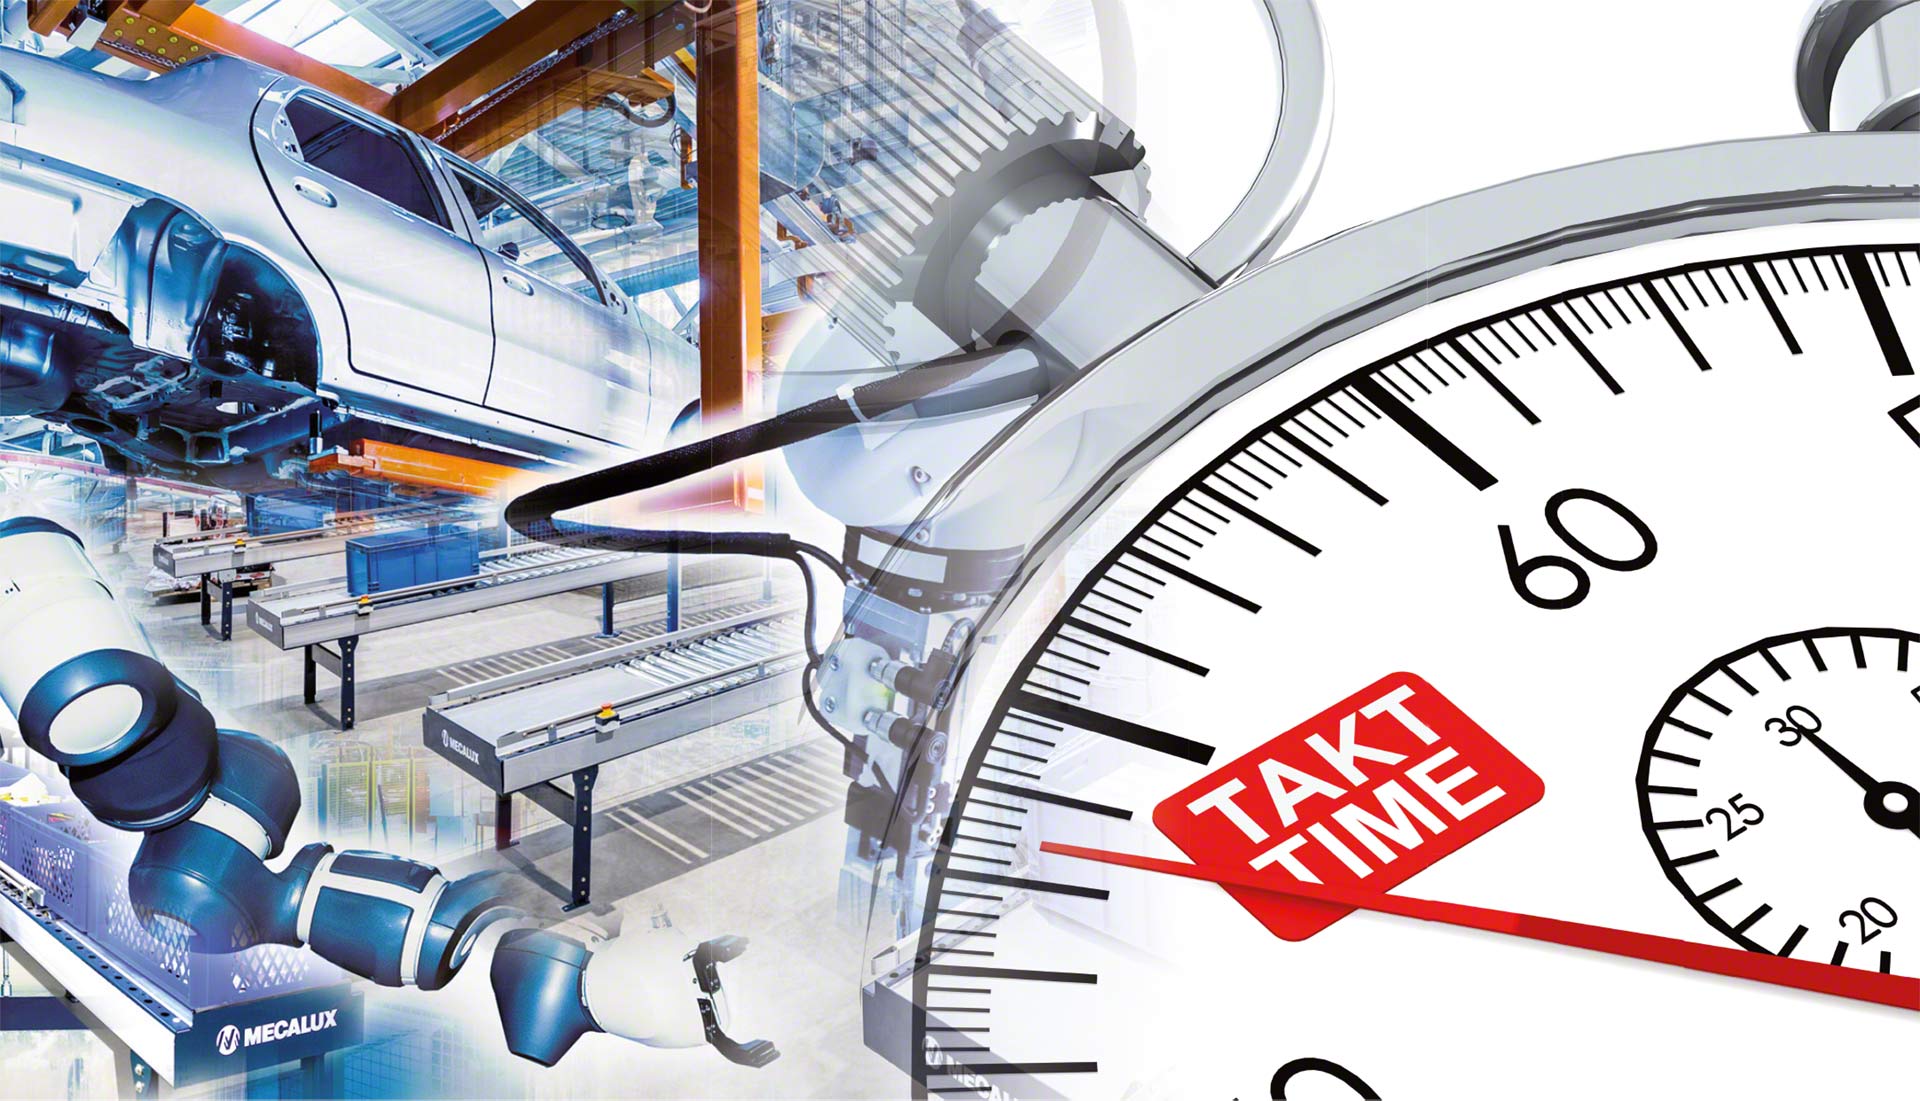 Takt time: what it is and how it's calculated